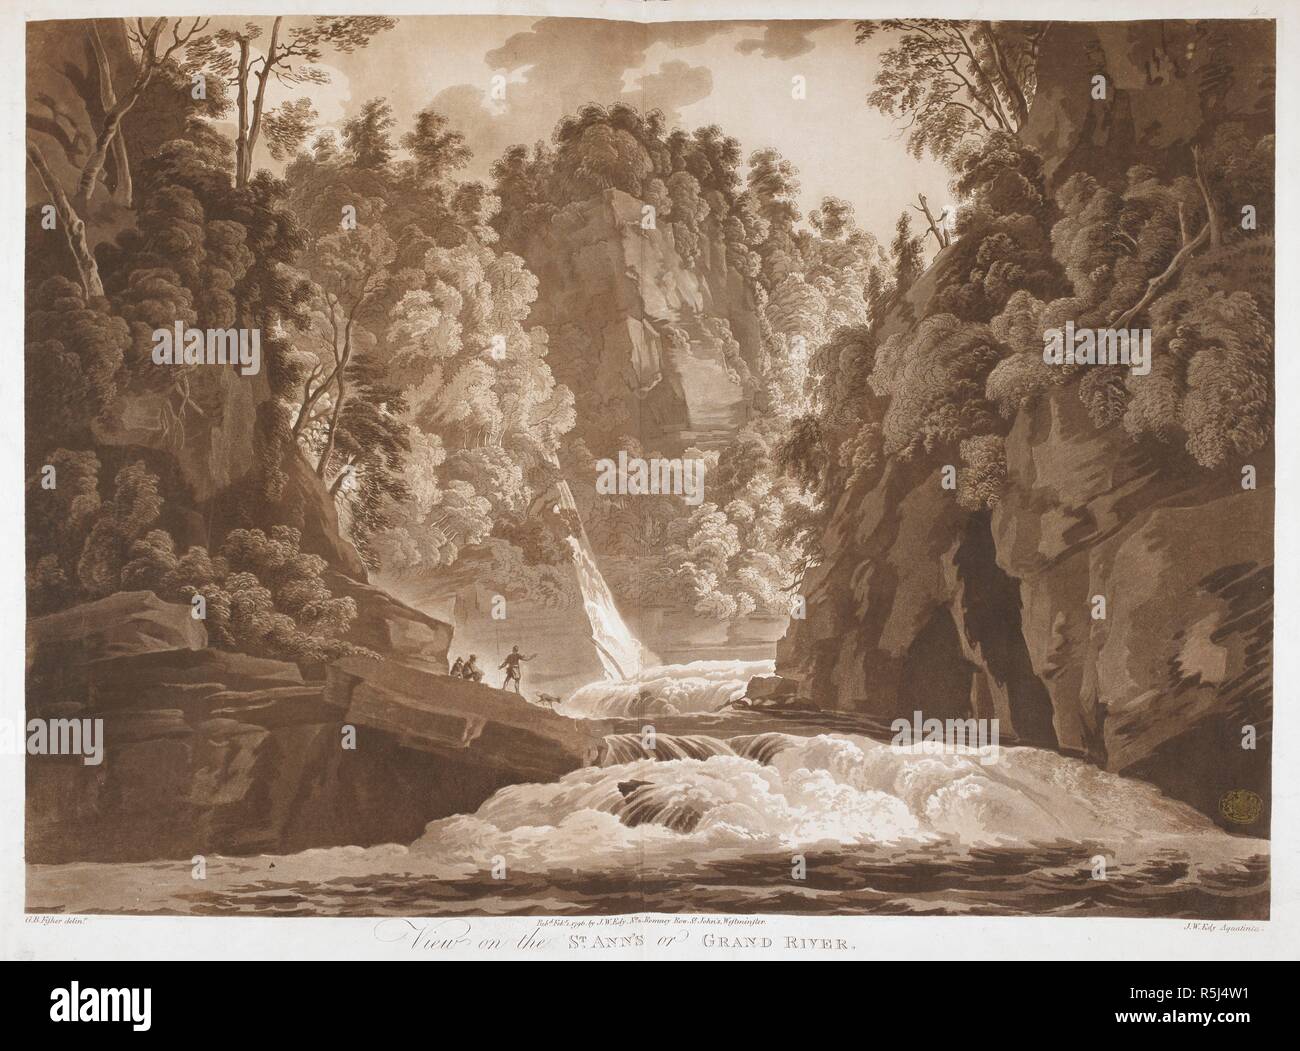 Landscape with figures and a dog on a spit of land at the foot of a steep tree-covered cliff, looking at a turbulent river which zig-zags between the mountains with a waterfall on the left and rapids in the foreground. View on the St ANN'S or GRAND RIVER. [London] : Pubd Feby 1 1796 by J.W. Edy, No 2, Romney Row, St John's, Westminster., [February 1 1796]. Aquatint and etching. Source: Maps K.Top.119.30.d. Language: English. Author: Edy, John William. Stock Photo